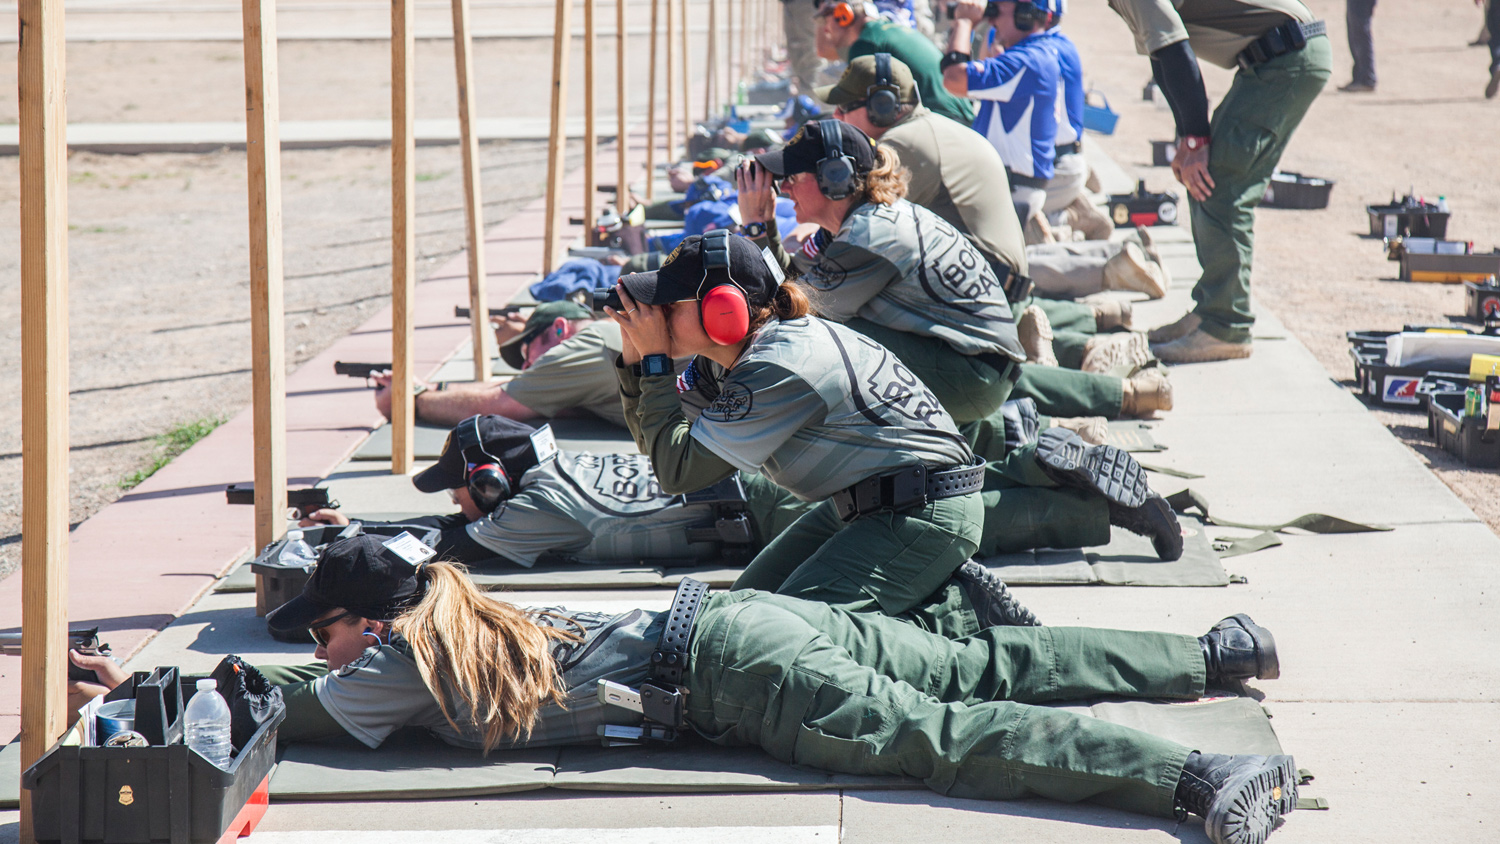 The Team competing at the 2016 NRA National Police Shooting Championship